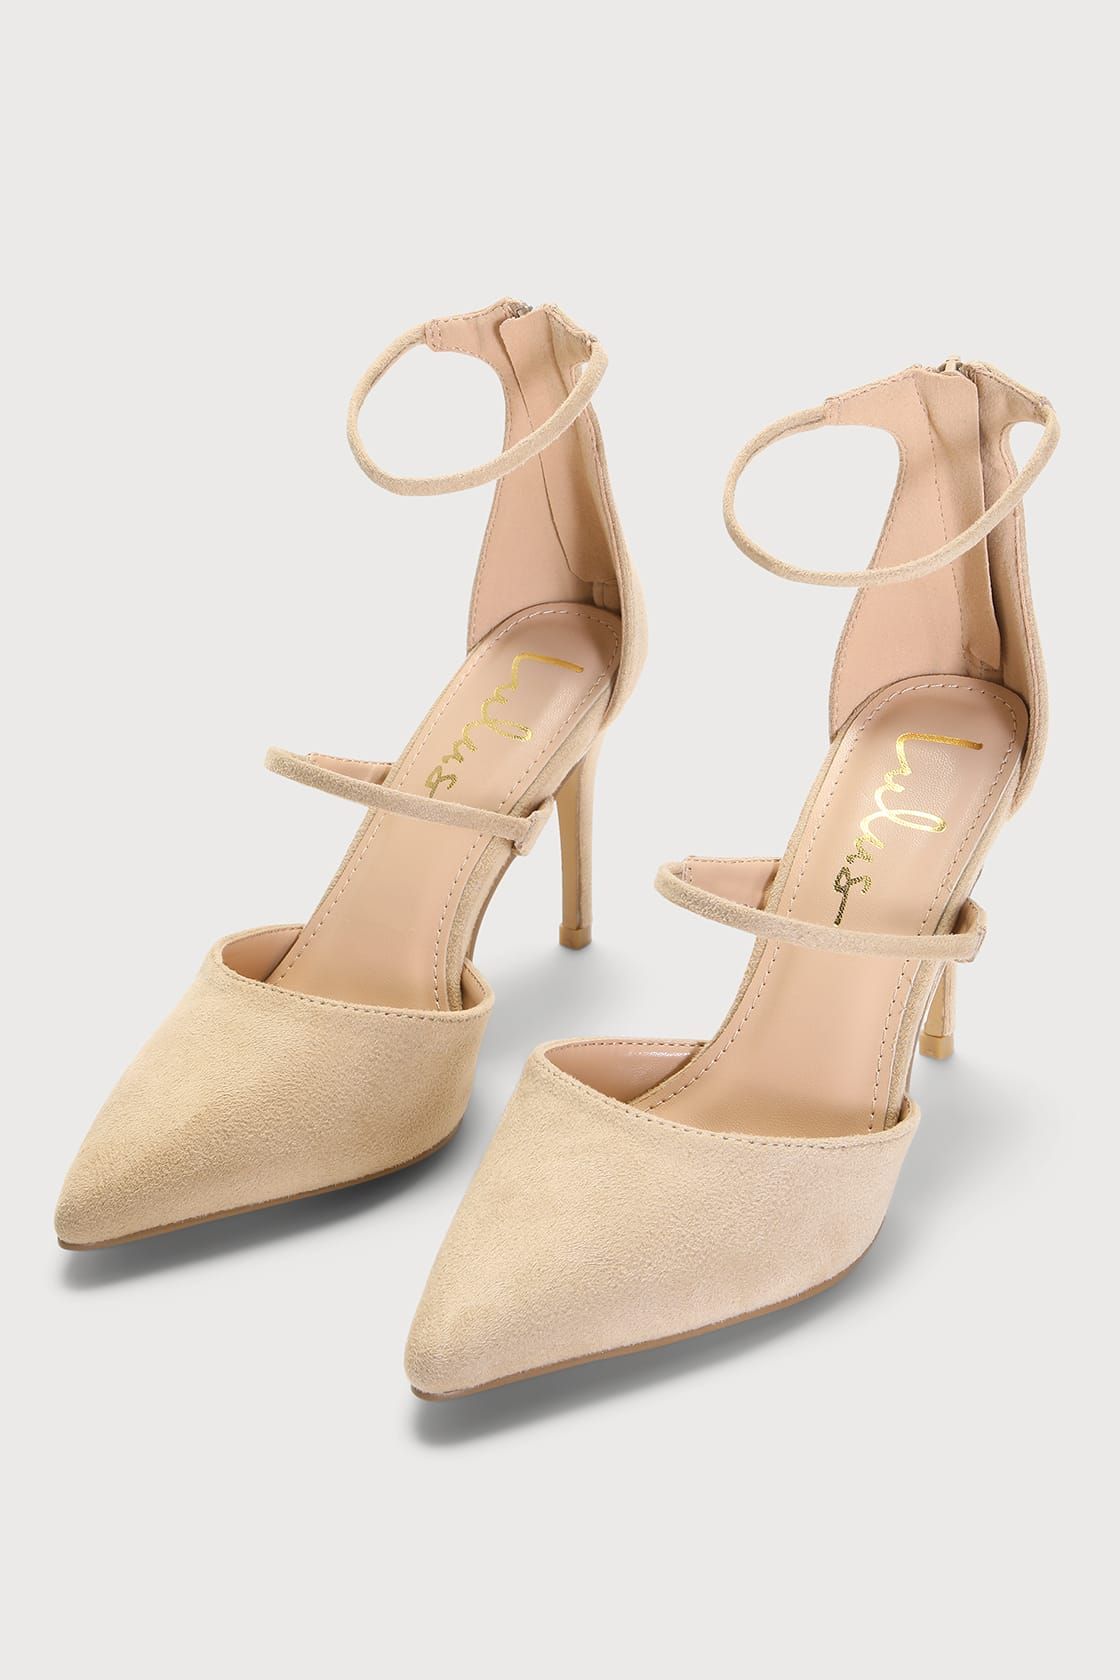 Lovelee Light Nude Suede Pointed-Toe Ankle Strap Pumps | Lulus